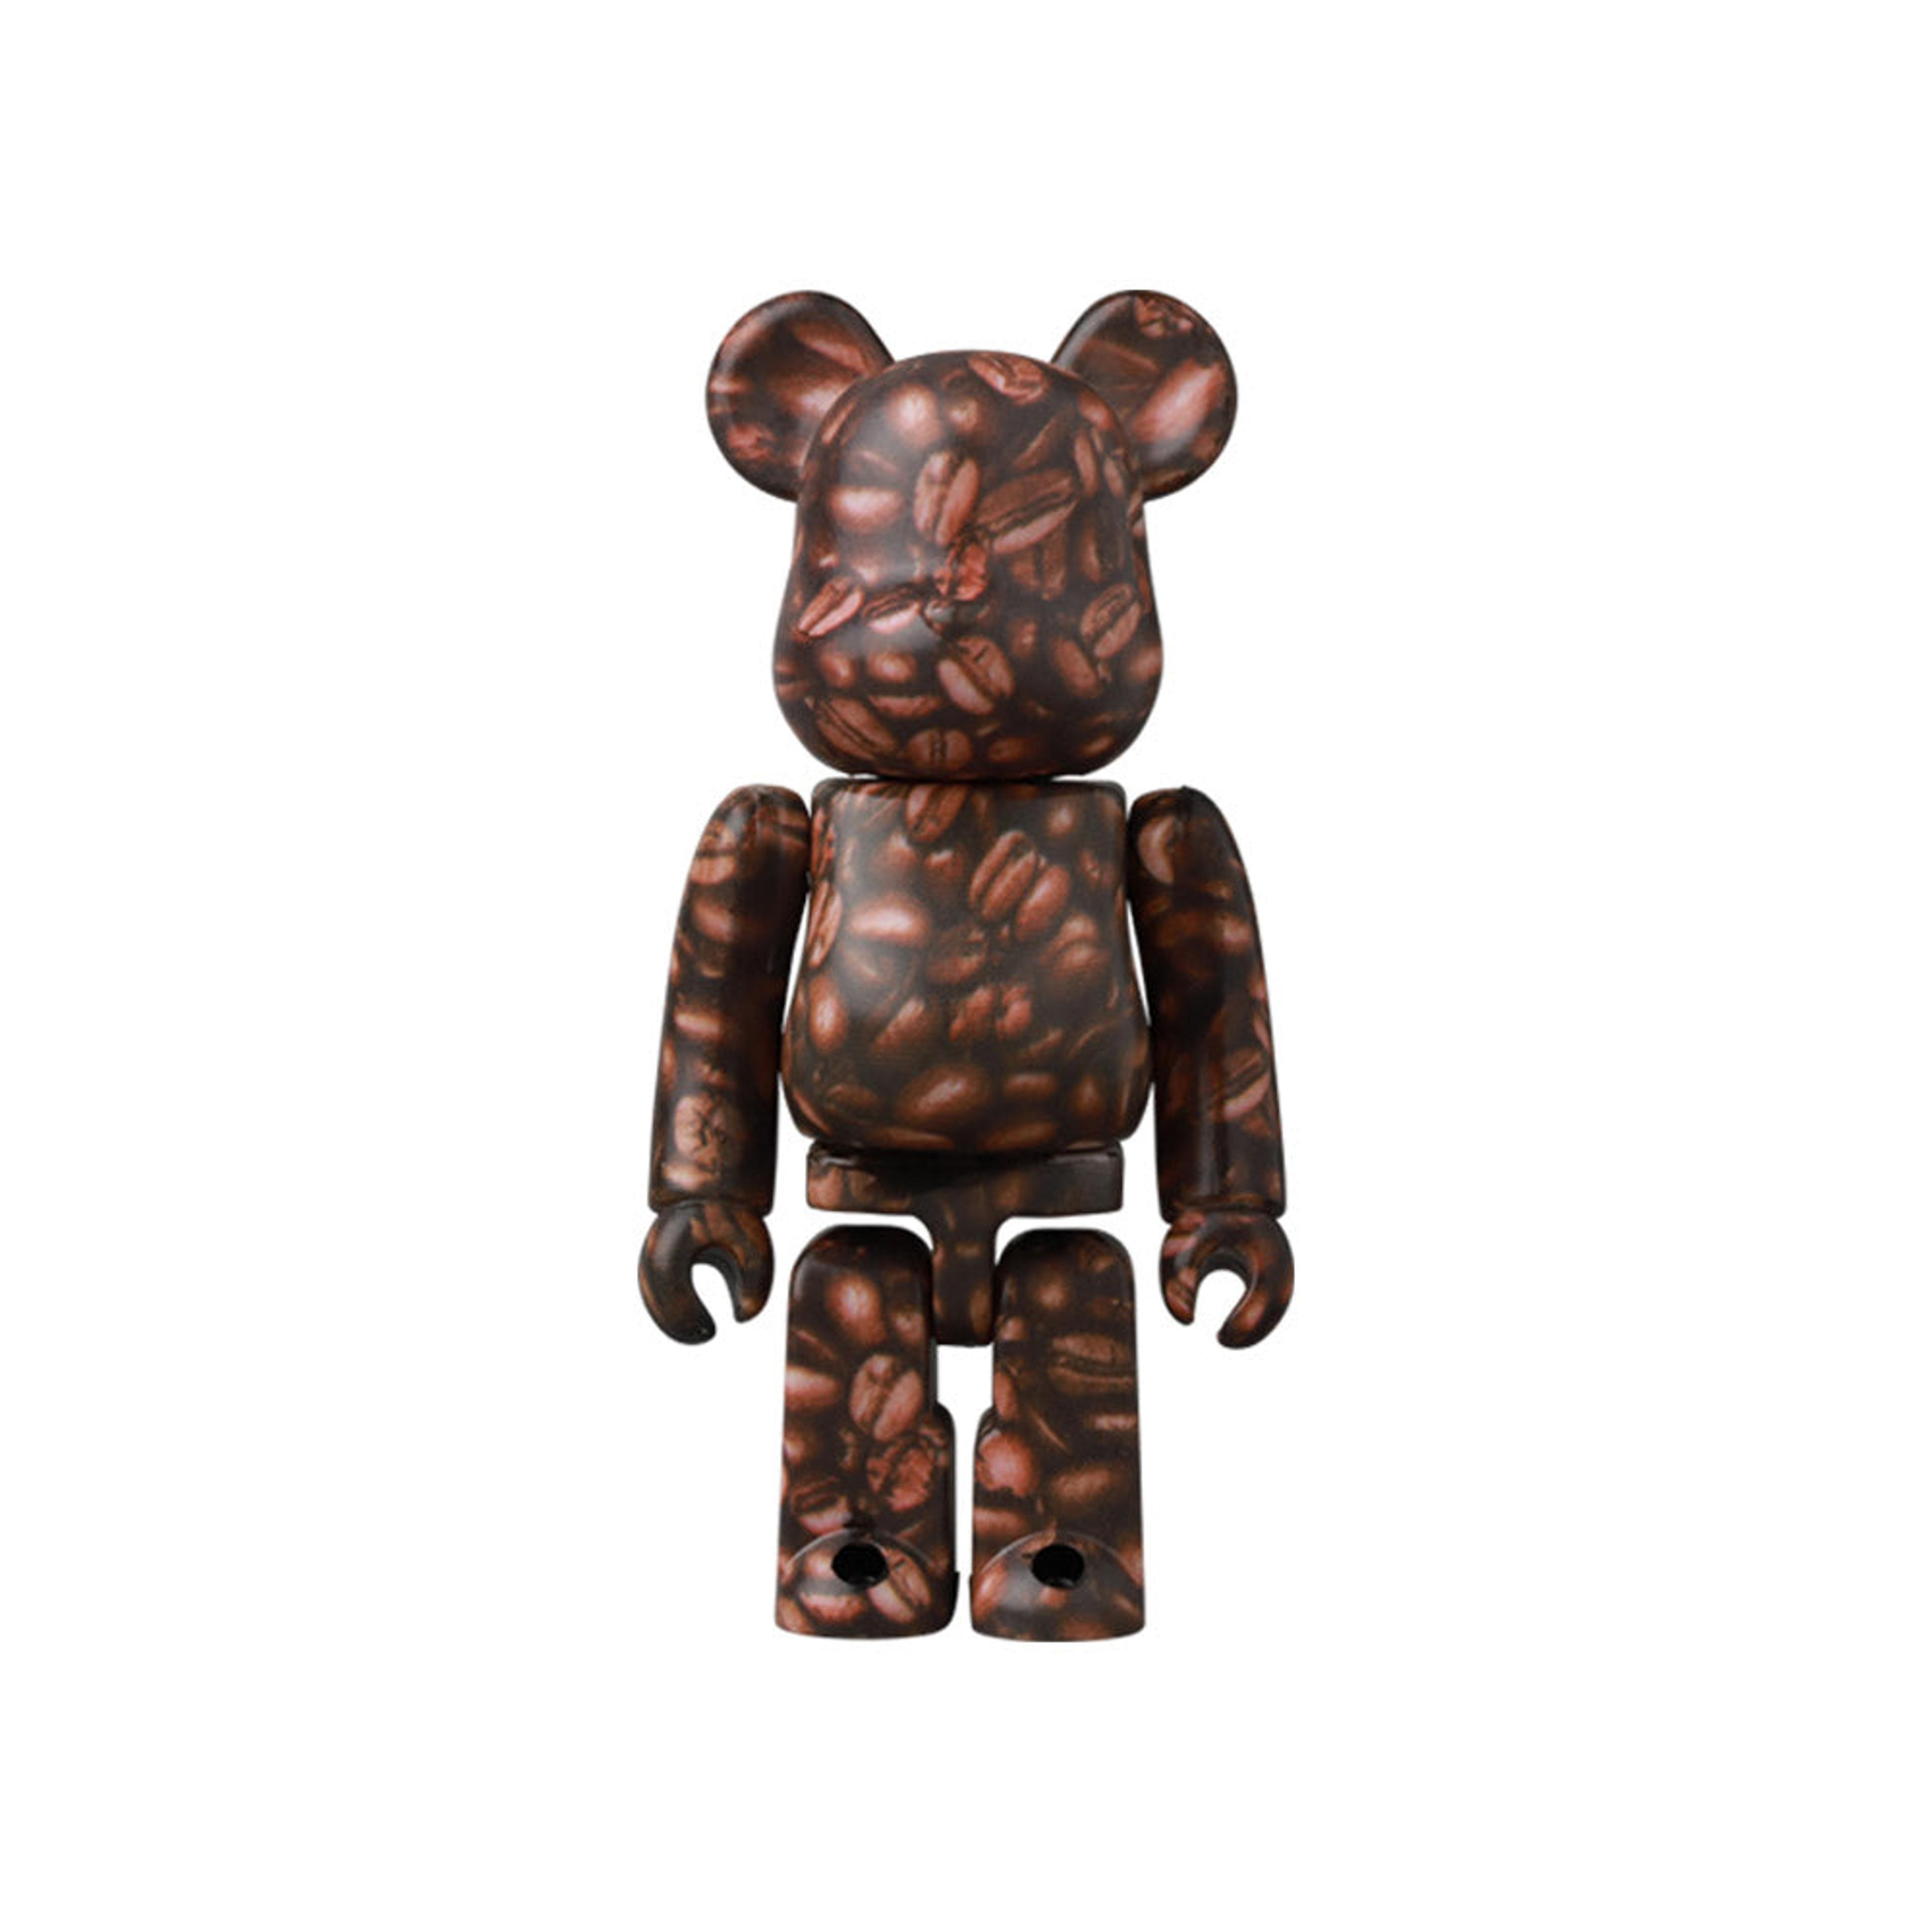 Alternate View 3 of Bearbrick Series 44 Display Case (24 Blind Boxes) by Medicom Toy